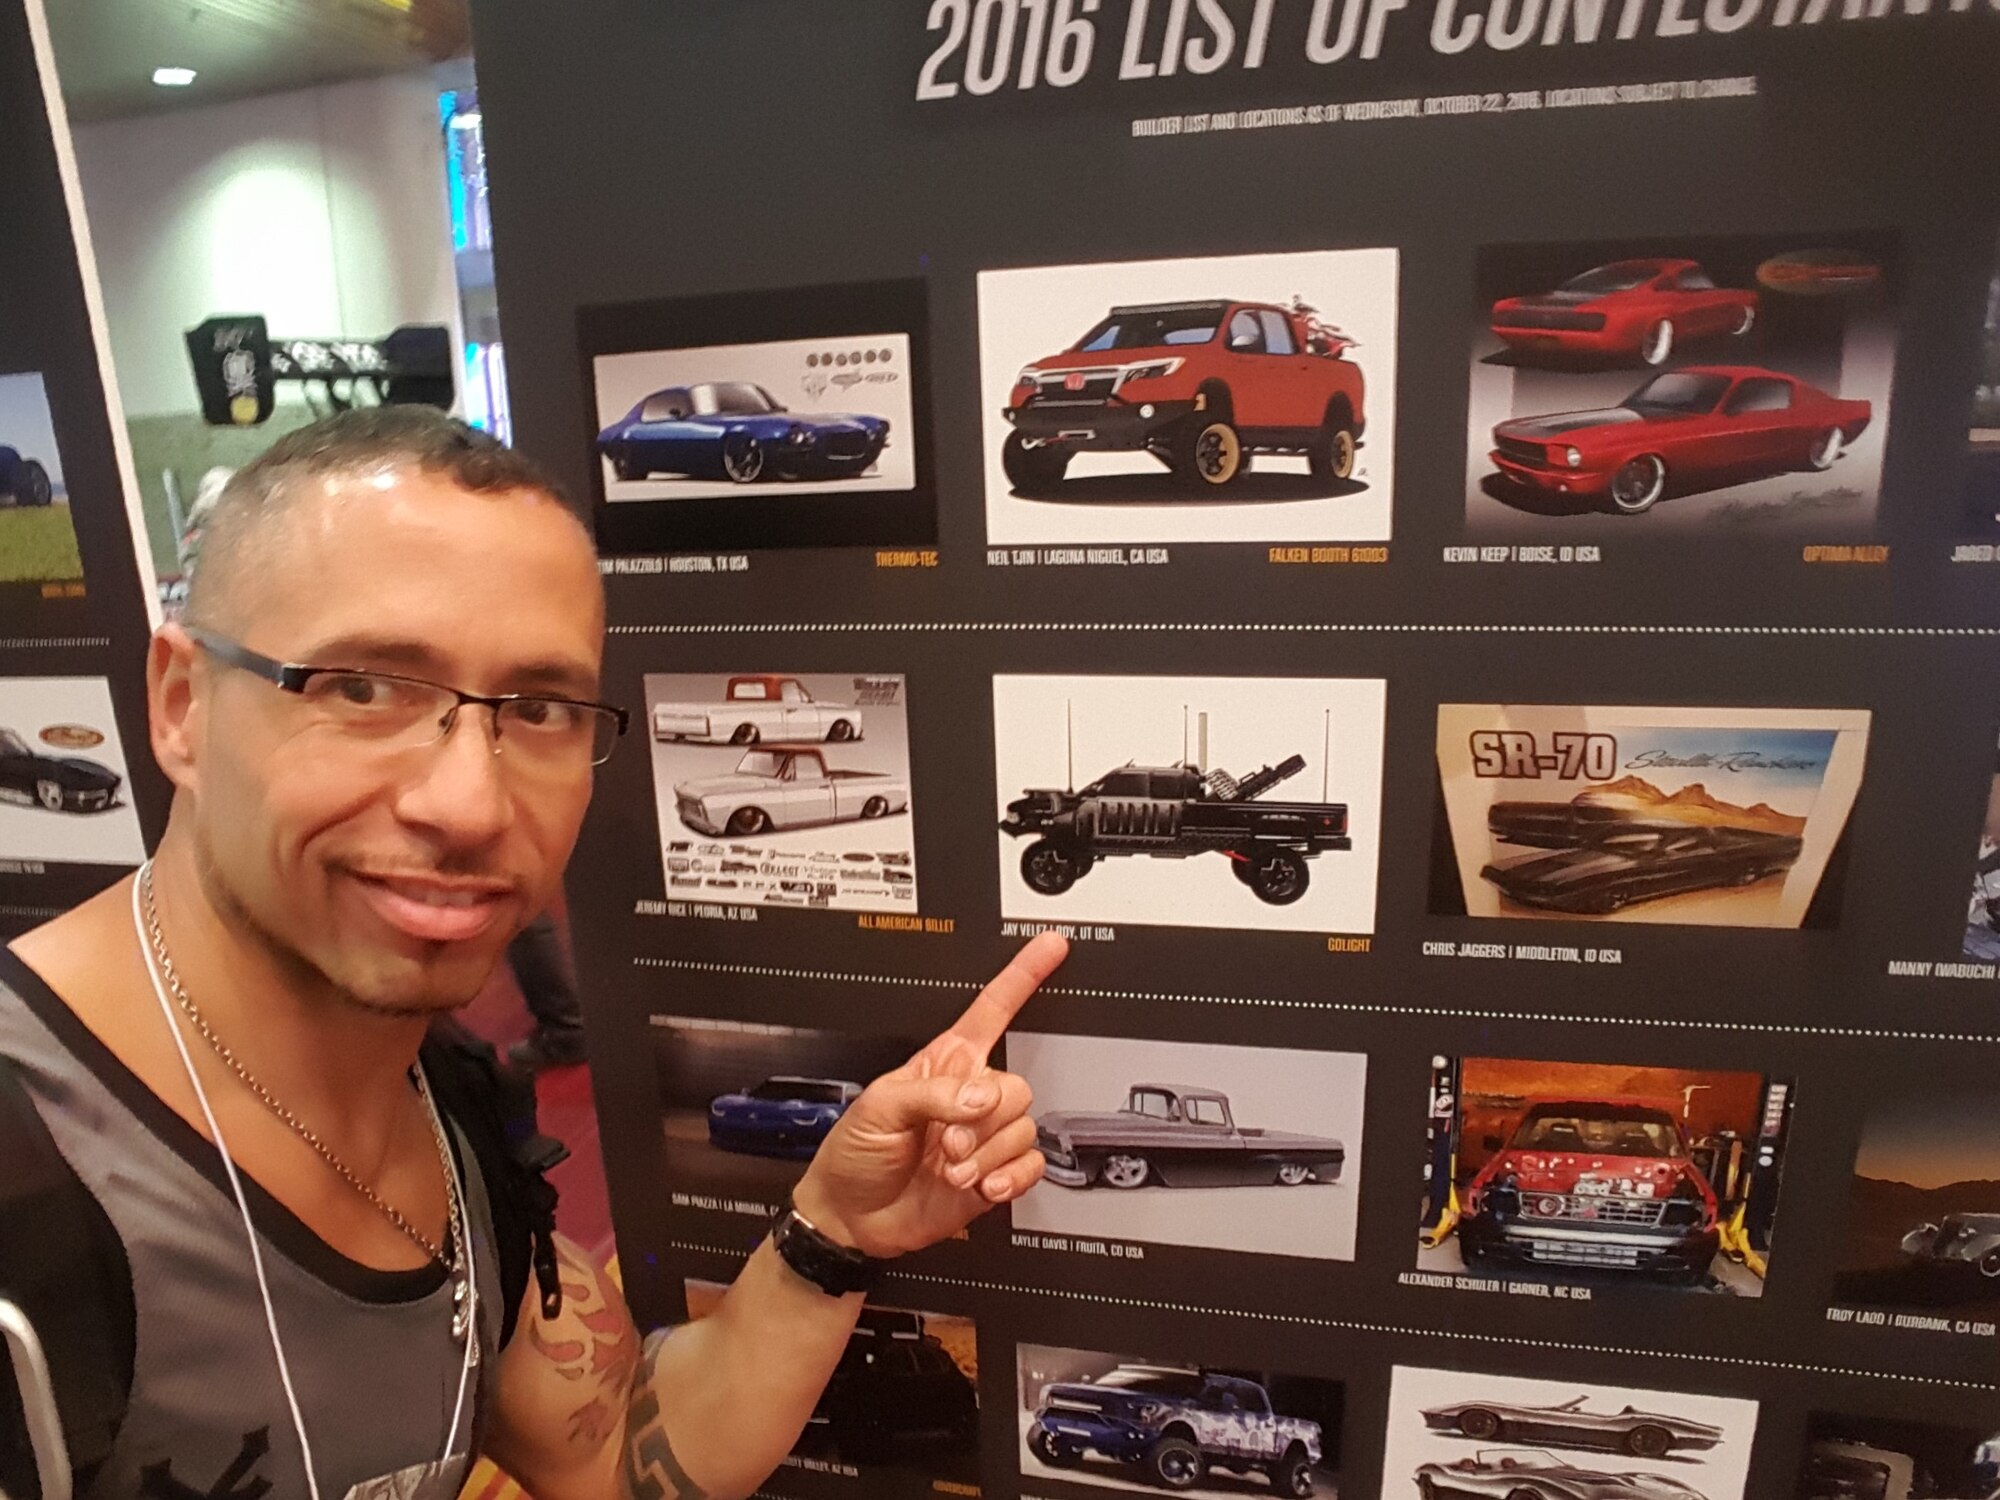 Jason Velez points to a picture of his custom built Dodge Ram 2500. Velez, a retired Airman,  rebuilt the truck to resemble a vehicle halfway between a personal vehicle and tactical military vehicle. Velez's truck was on exhibit in the Battle of the Builder at the 2016 Specialty Equipment Market Association (SEMA) Show in Las Vegas in November, the foremost automotive specialty products trade event worldwide. (Courtesy photo)